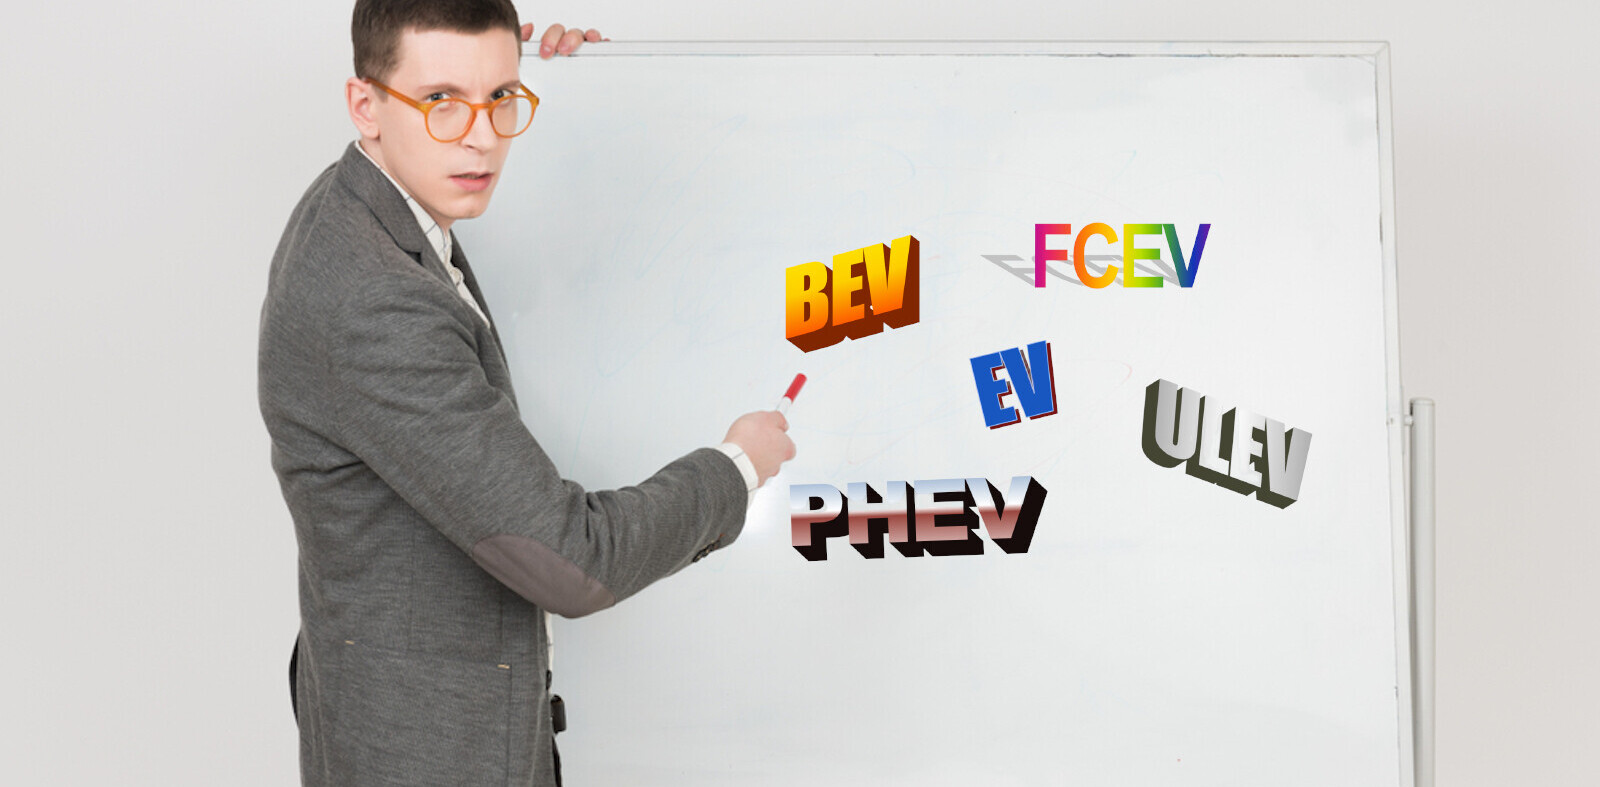 Electric vehicle acronym guide: Know your BEVs from FCEVs from PHEVs from ULEVs